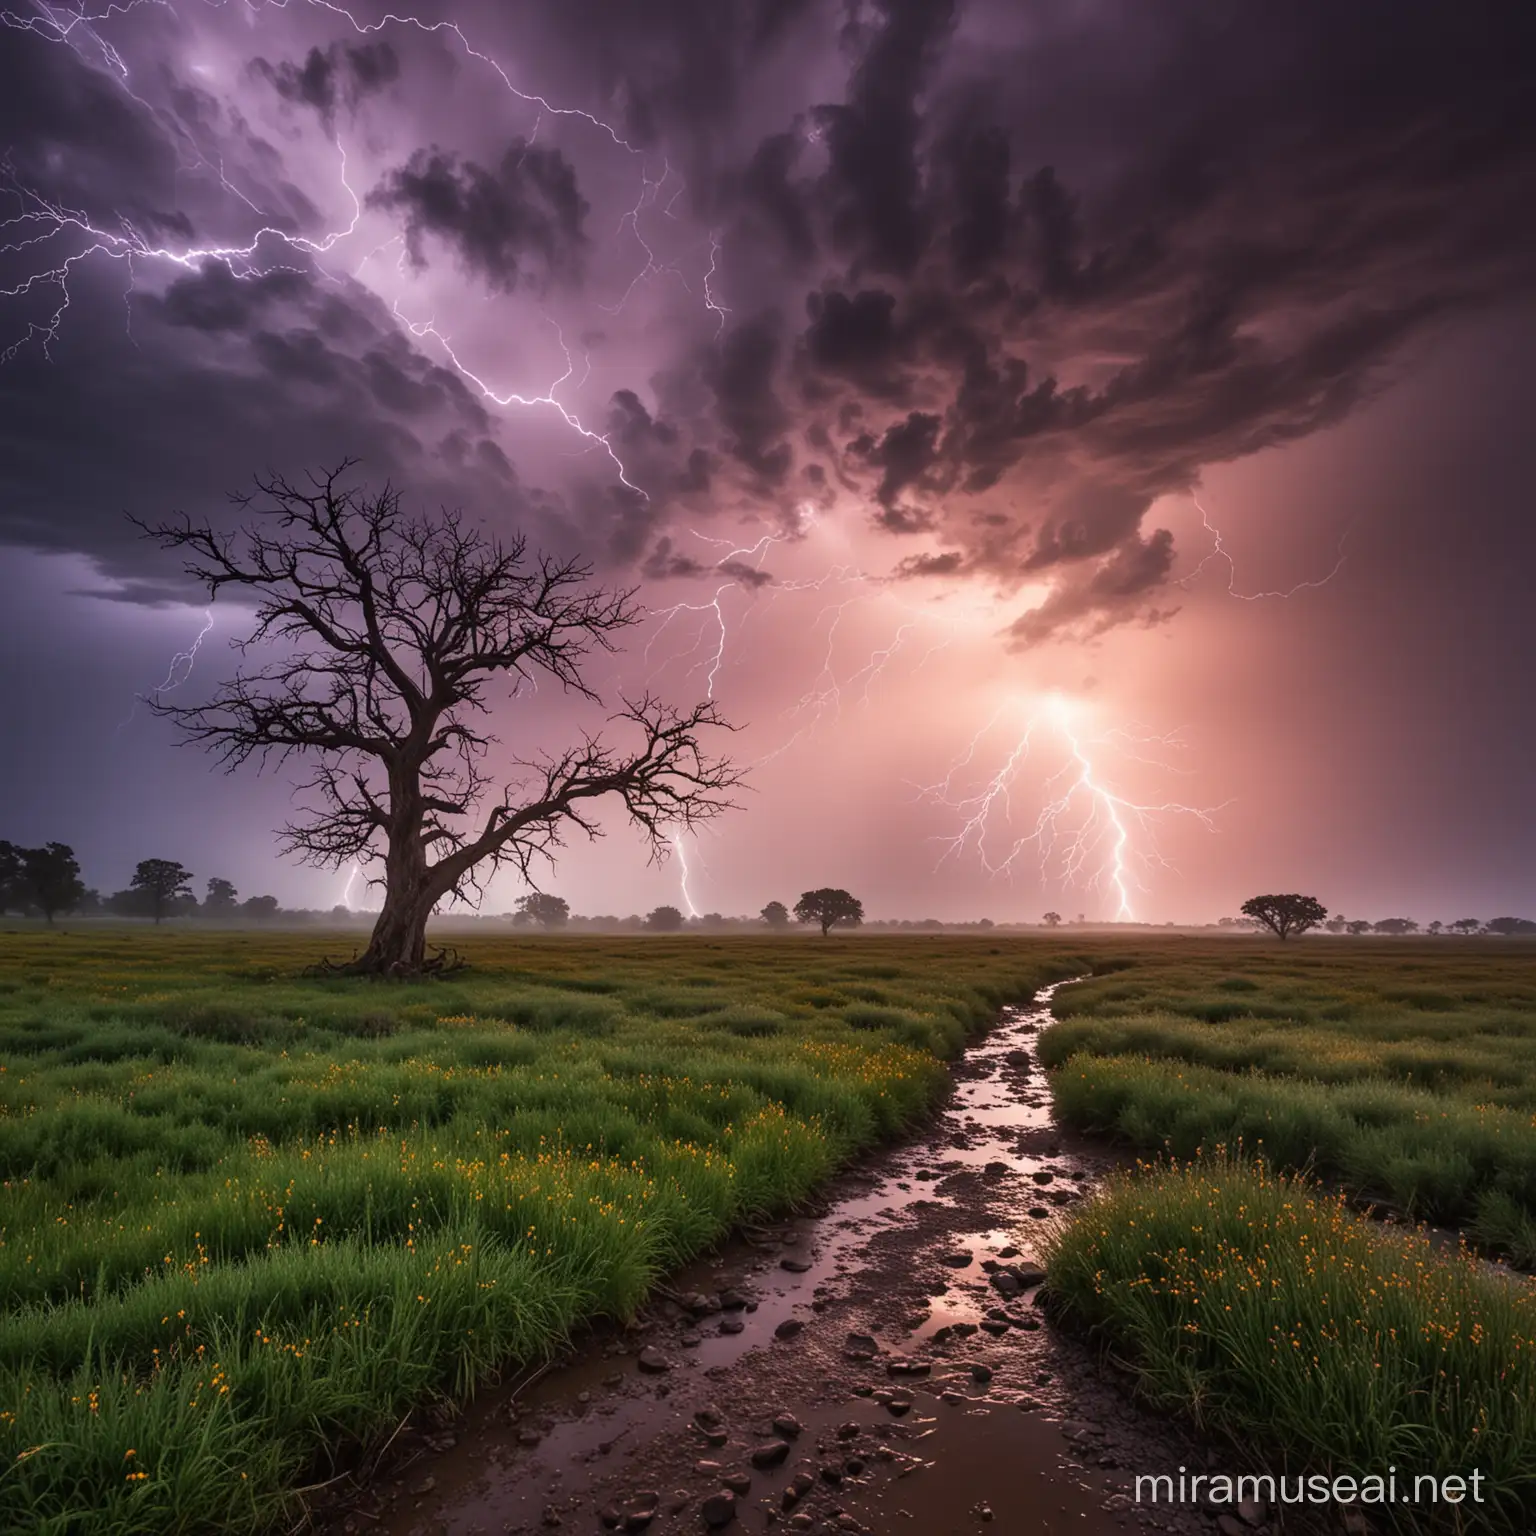 Vivid AweInspiring Landscape with Misty Valley and Dramatic Lightning